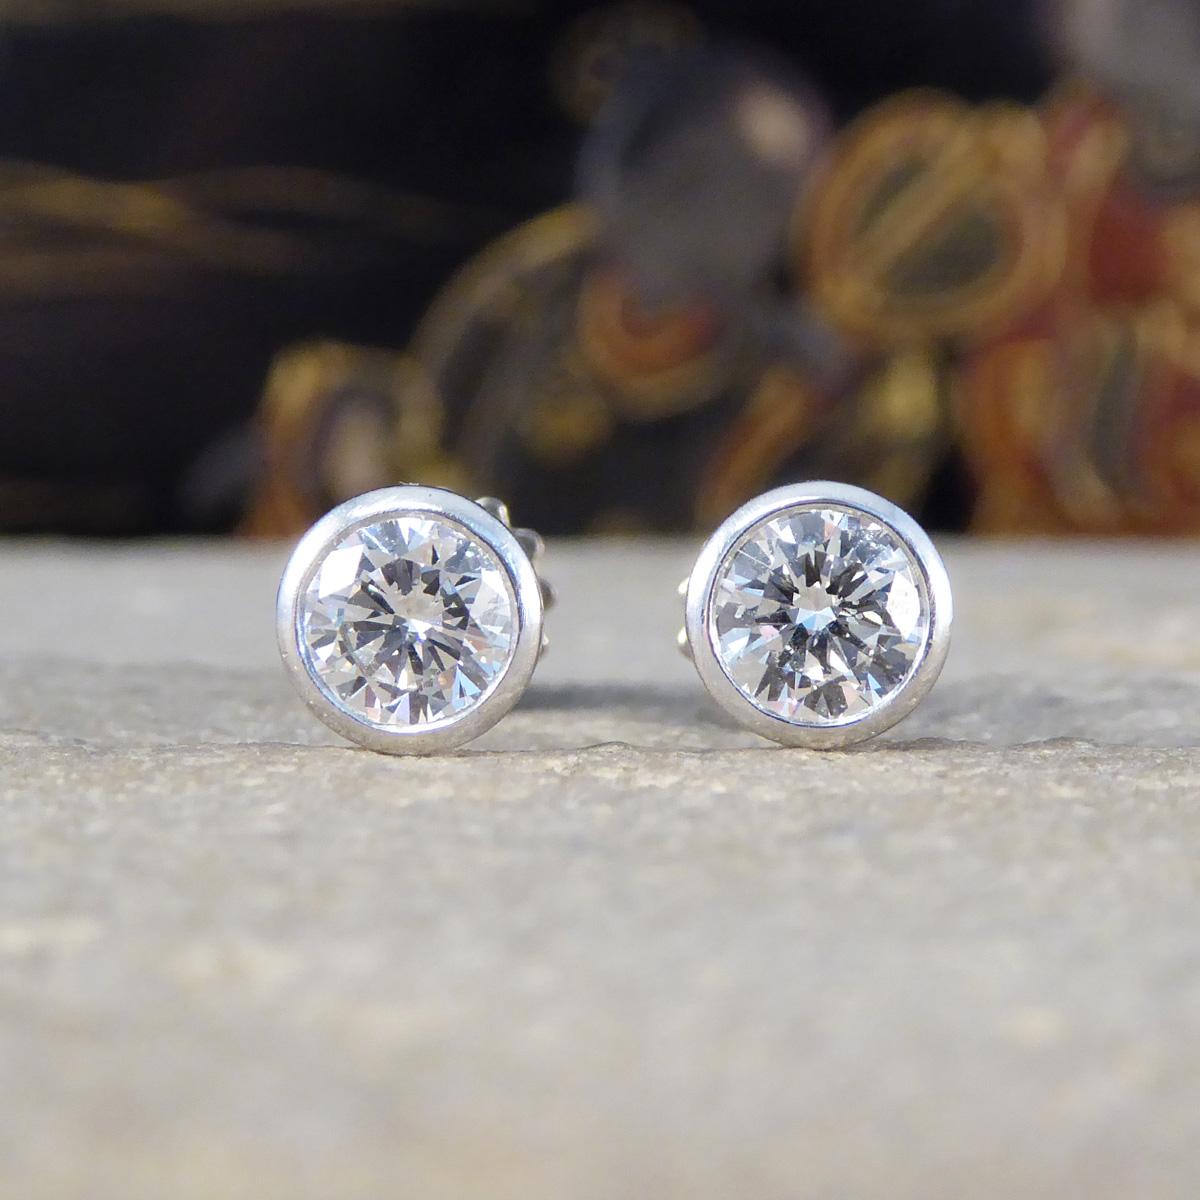 A beautifully bright and sparkly pair of Diamond stud earrings in 18ct White Gold with a secure and safe screw back, the perfect pair of earrings for those who like that extra security. Each stud holds a half carat round brilliant cut Diamond in a